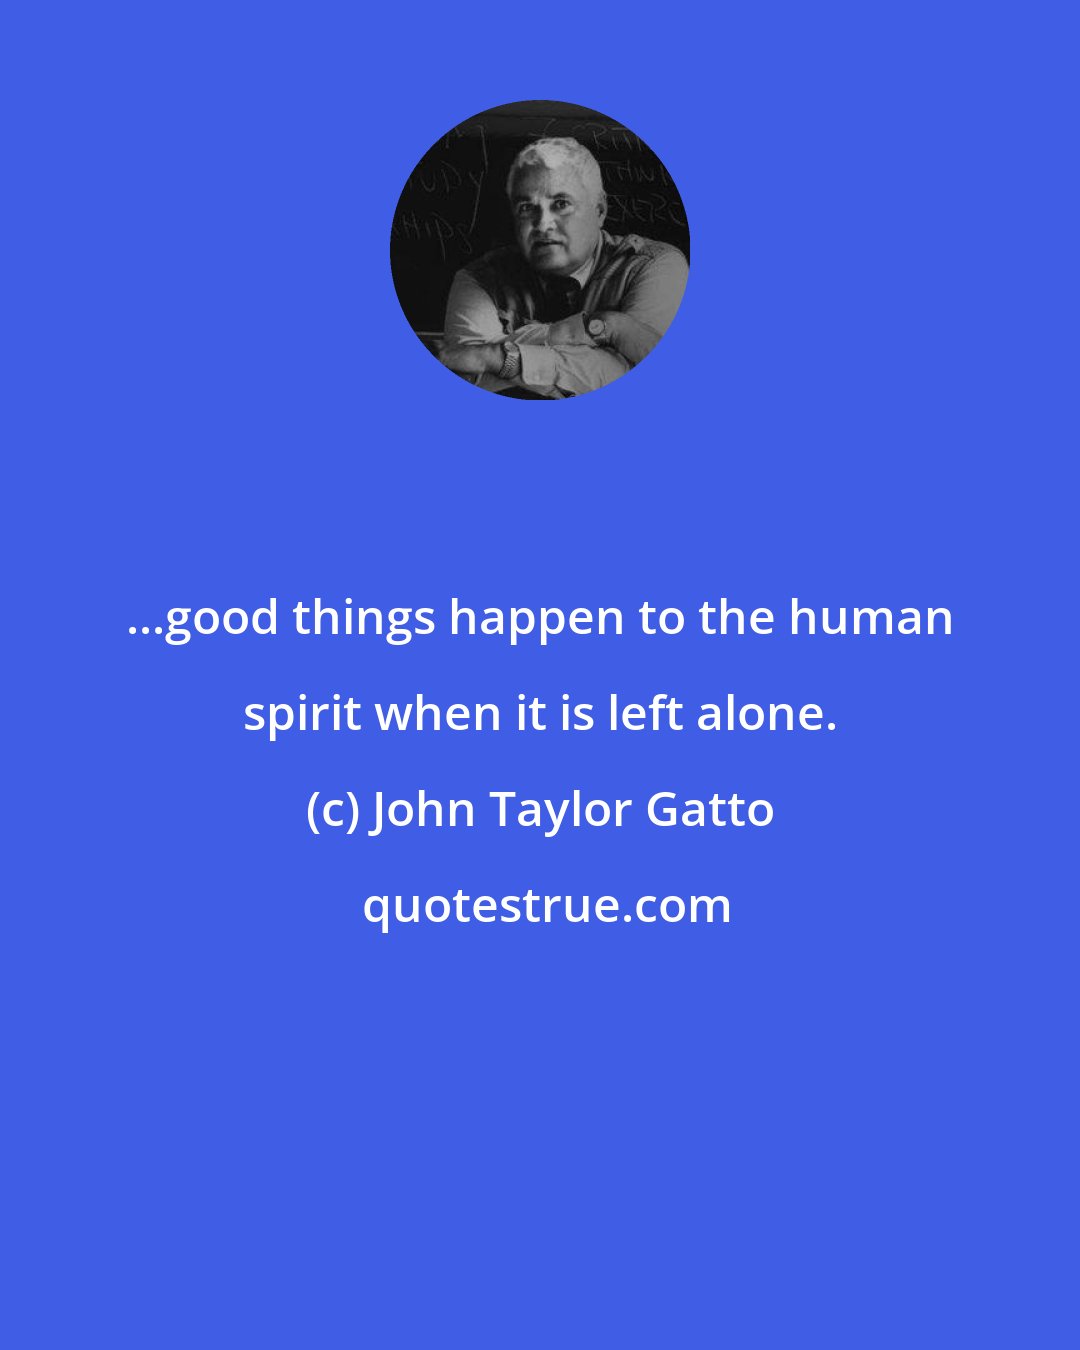 John Taylor Gatto: ...good things happen to the human spirit when it is left alone.